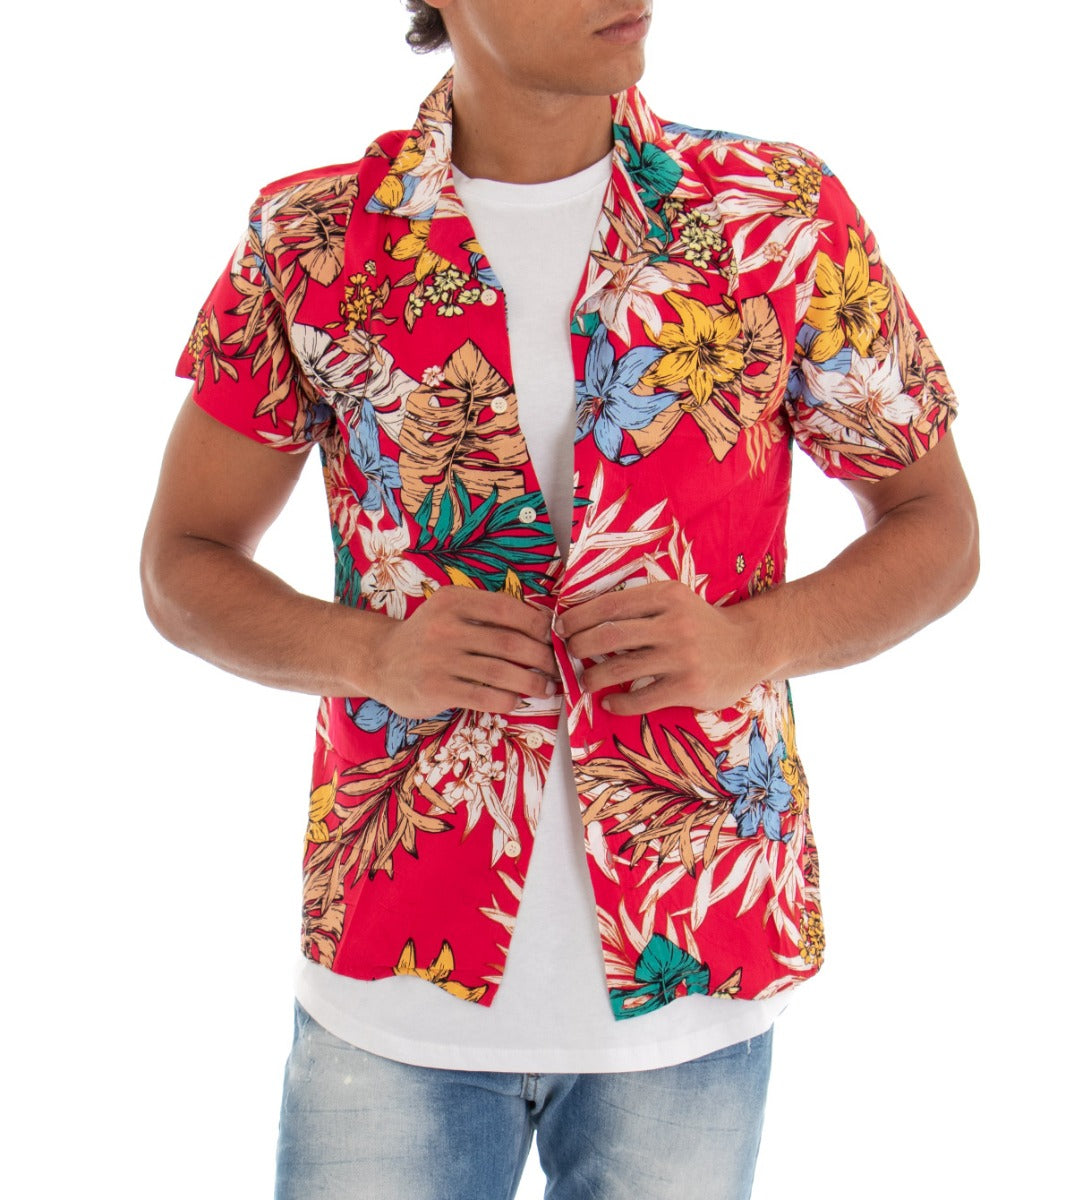 Men's Shirt Short Sleeve Collar Floral Multicolored Red GIOSAL-CC1107A